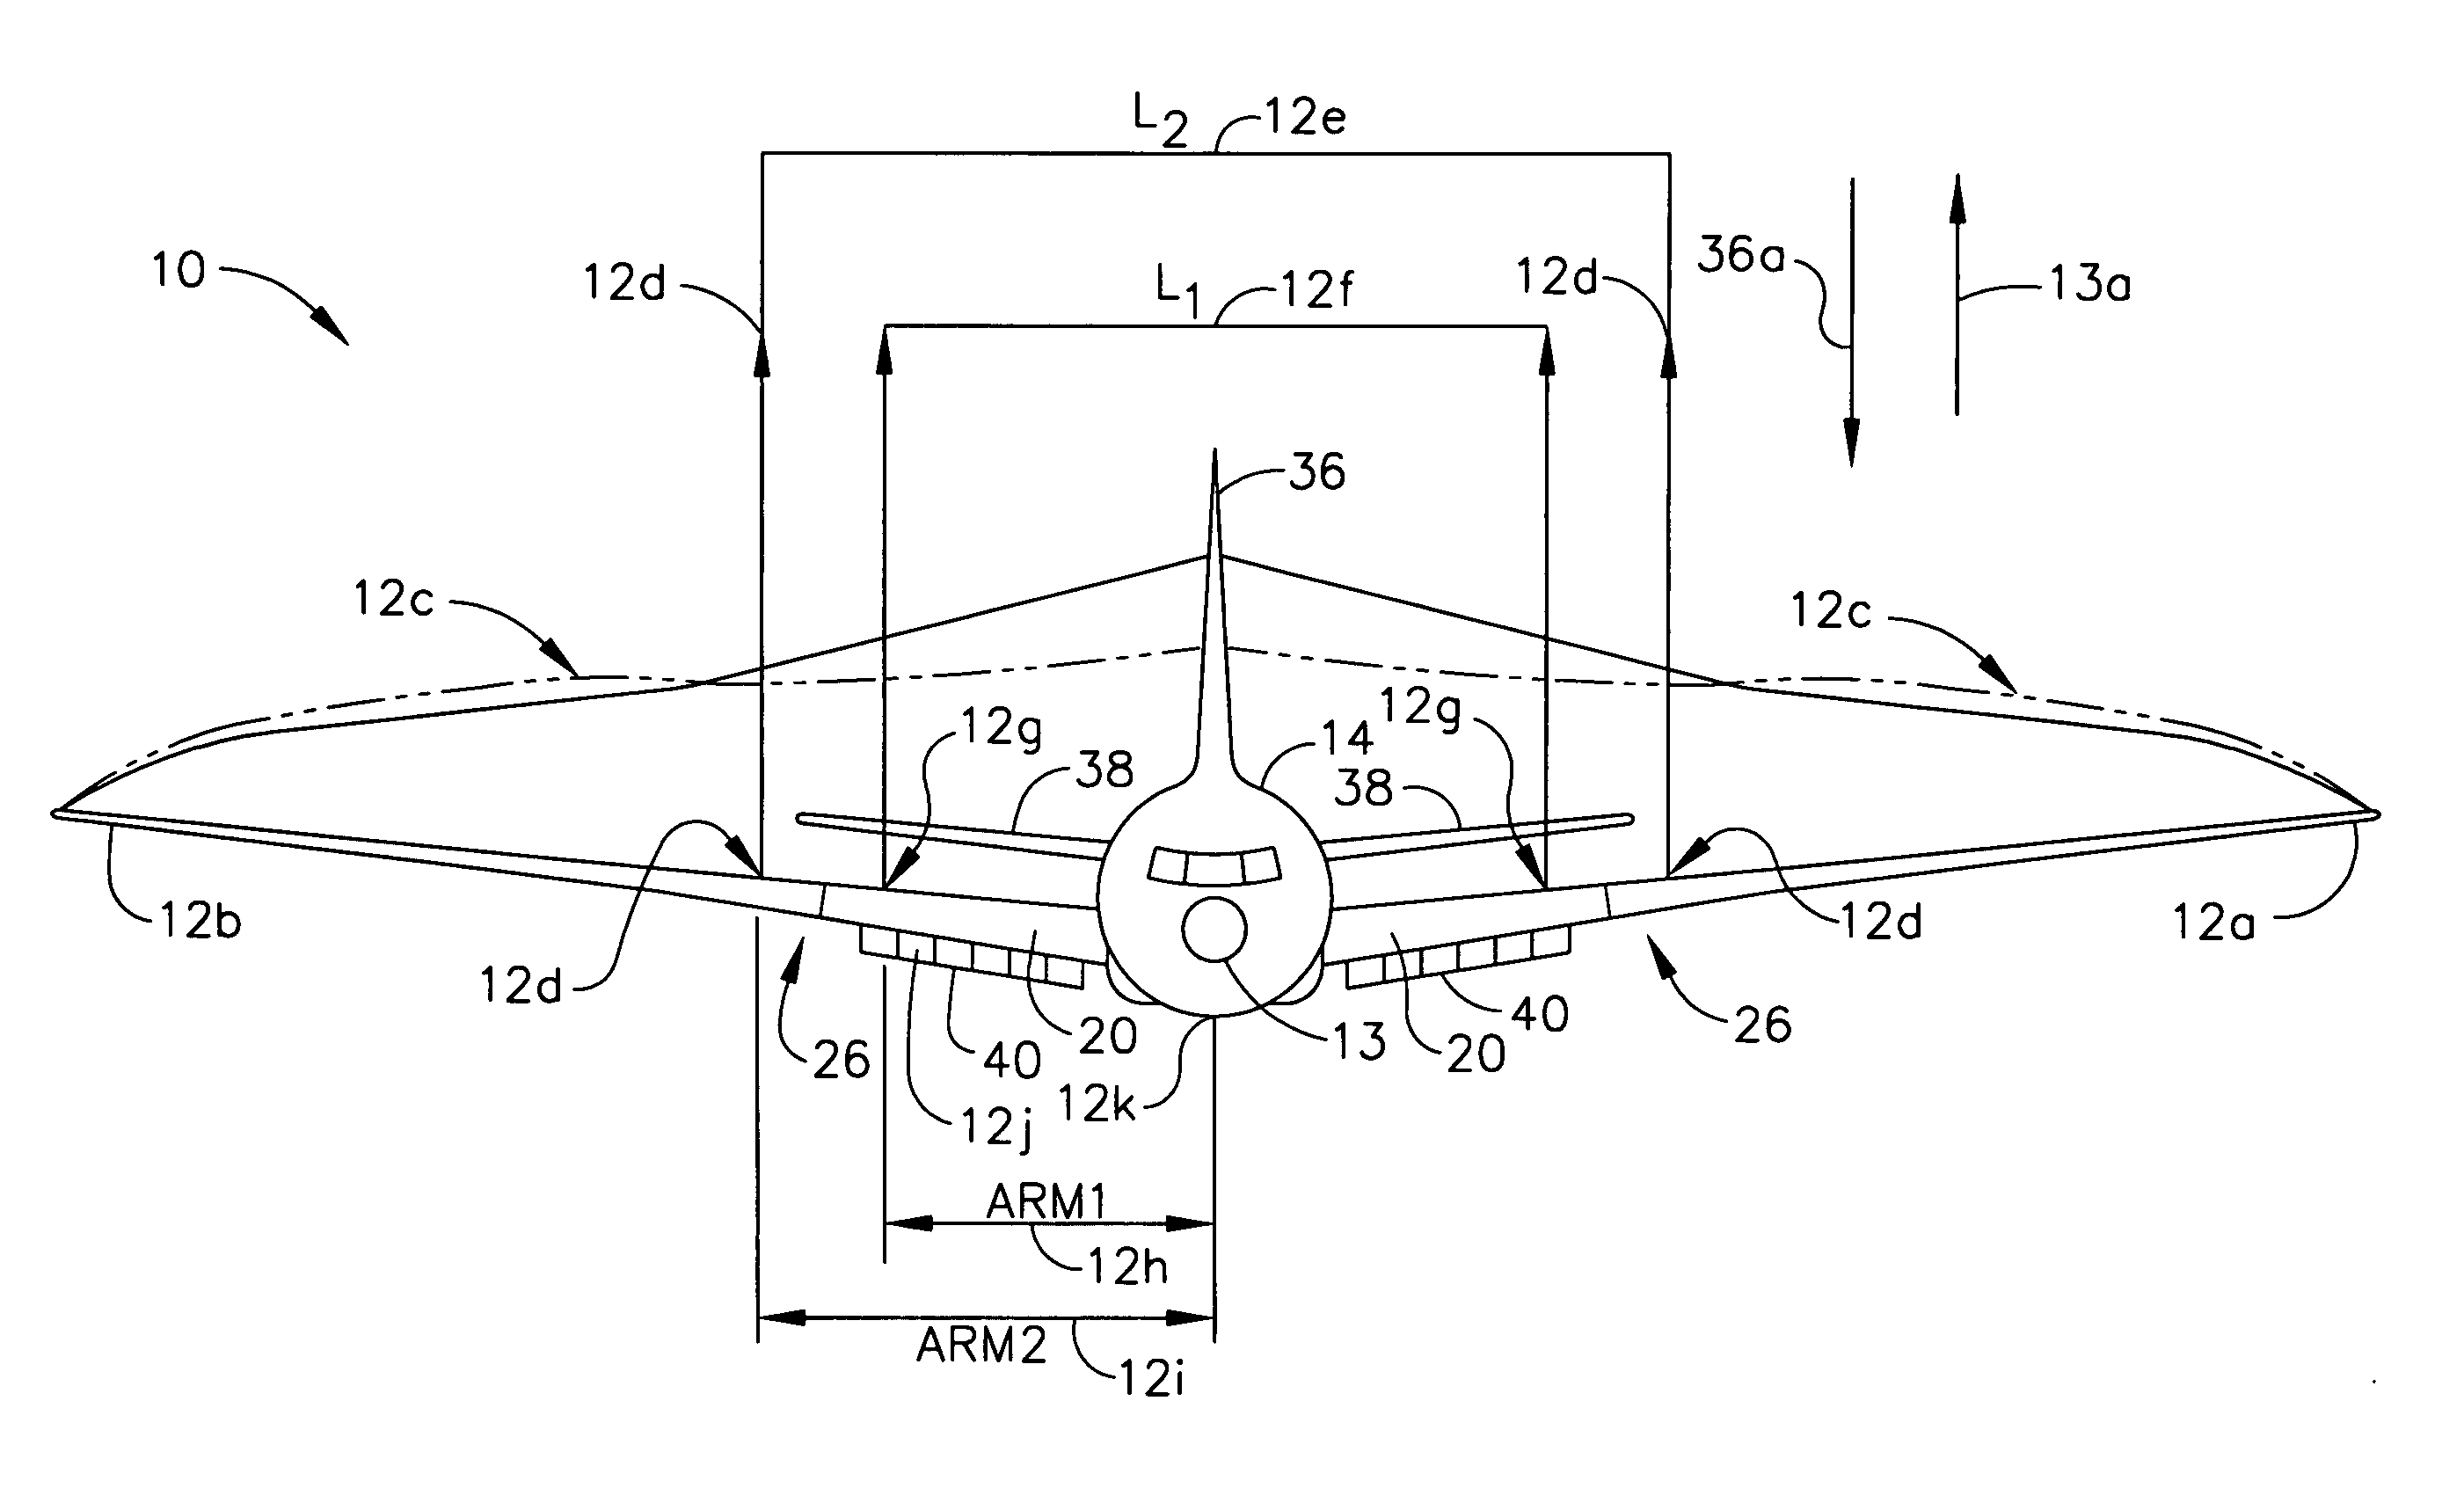 Lifters, methods of flight control and maneuver load alleviation